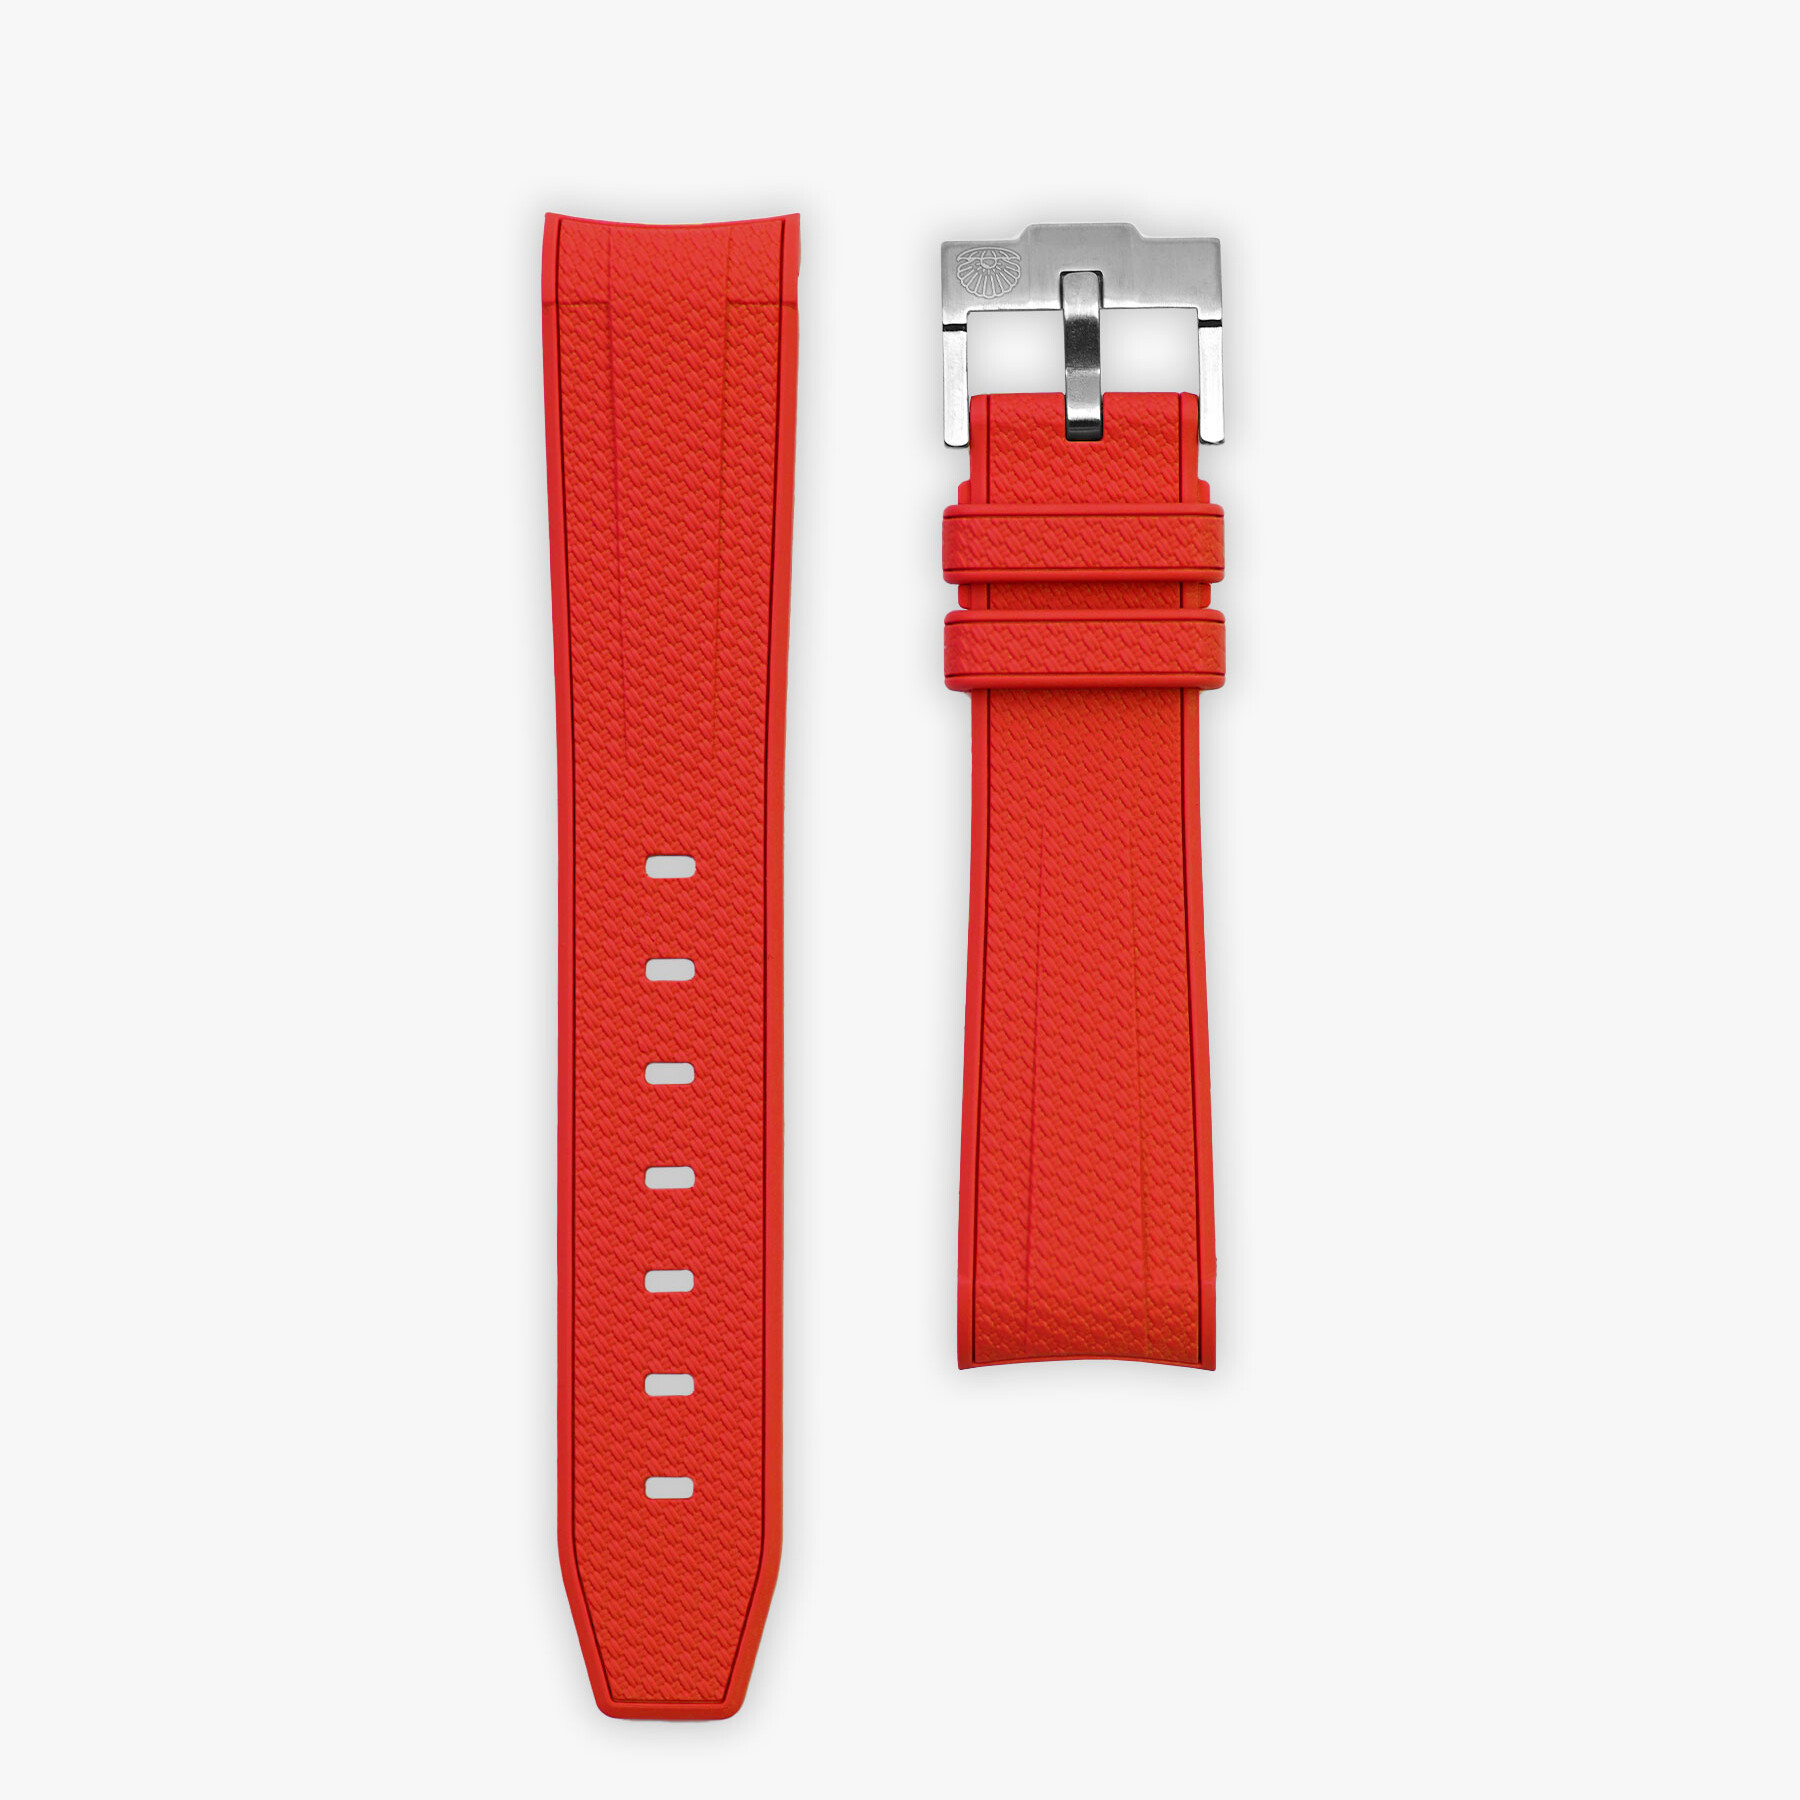 Mission to Mars Rubber Strap - Mars Red